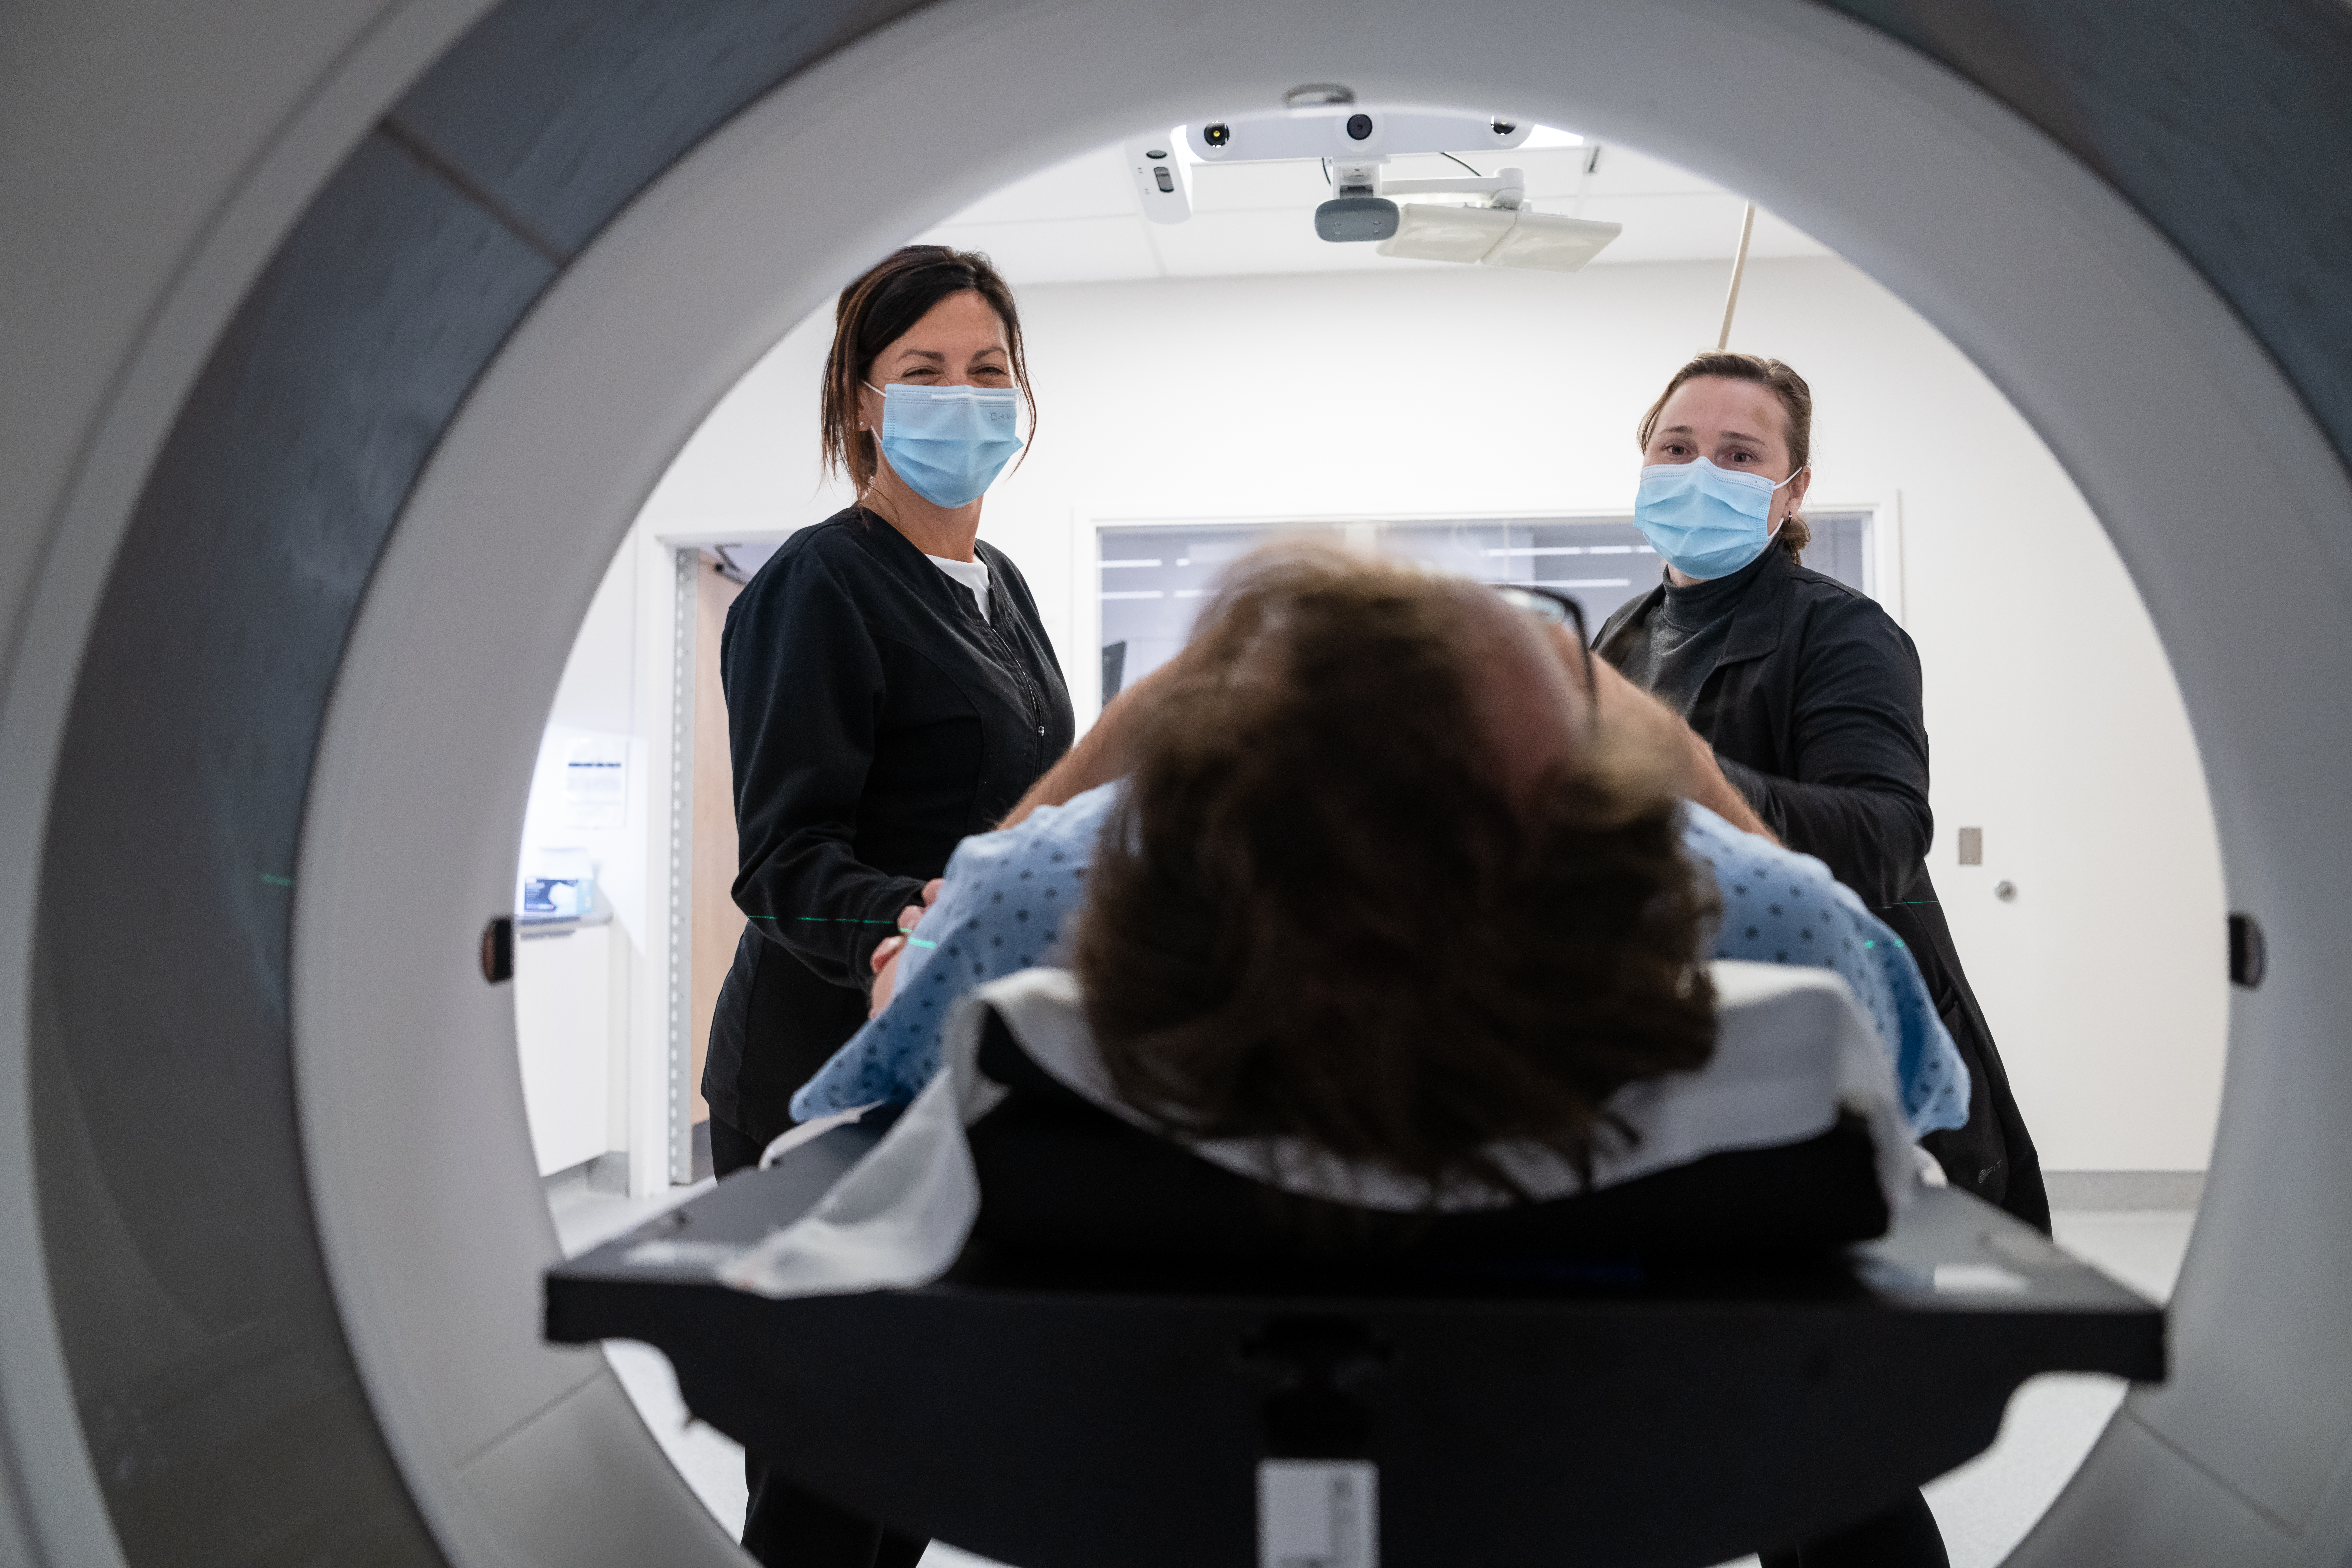 Image Medical imaging at risk for service breaks in the Outaouais region | APTS and Québec government reach agreement aiming for parity with Ontario - APTS